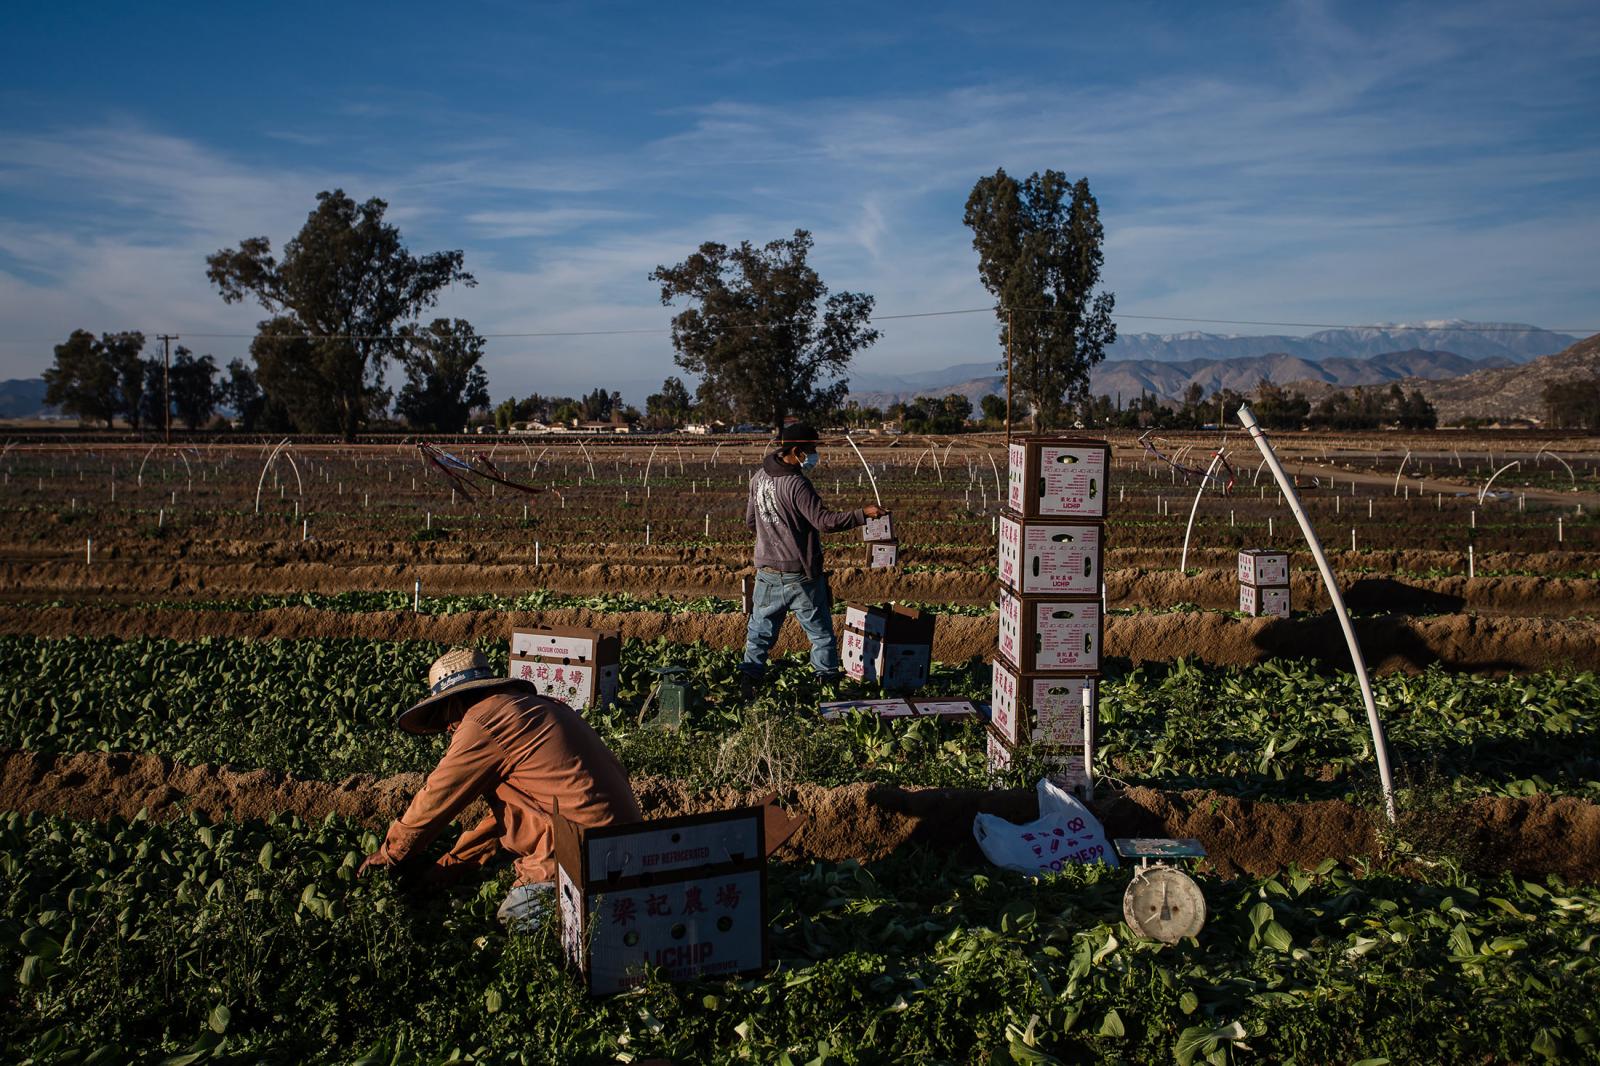 Image from United States - Farmworkers in Hemet, Riverside County, California on...